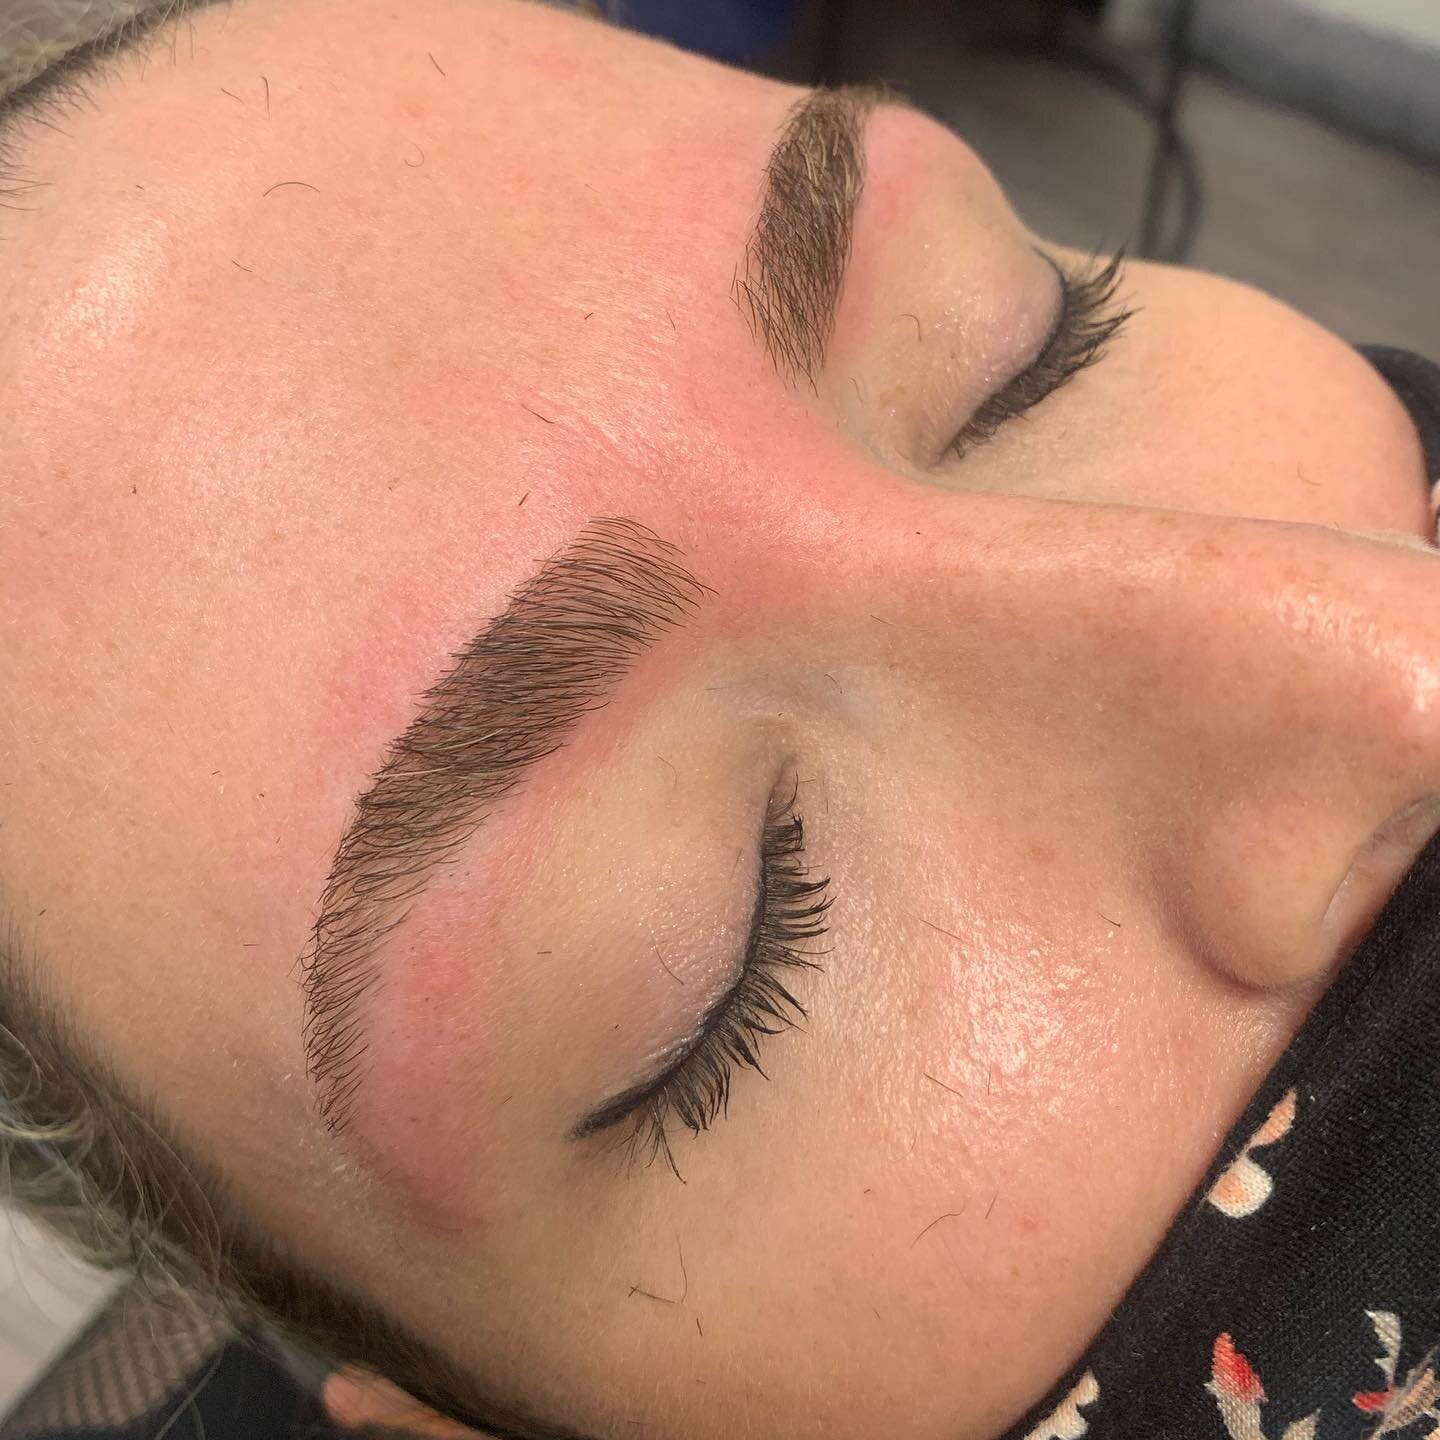 Sister brow goals! 

Do you have a friend, family member or partner interested in trying threading? Bring them to your next appointment and I&rsquo;ll take it from there 😉 

#browthreading #threading #browgoals #pittsburgh #pittsburghsalon #pittsbur